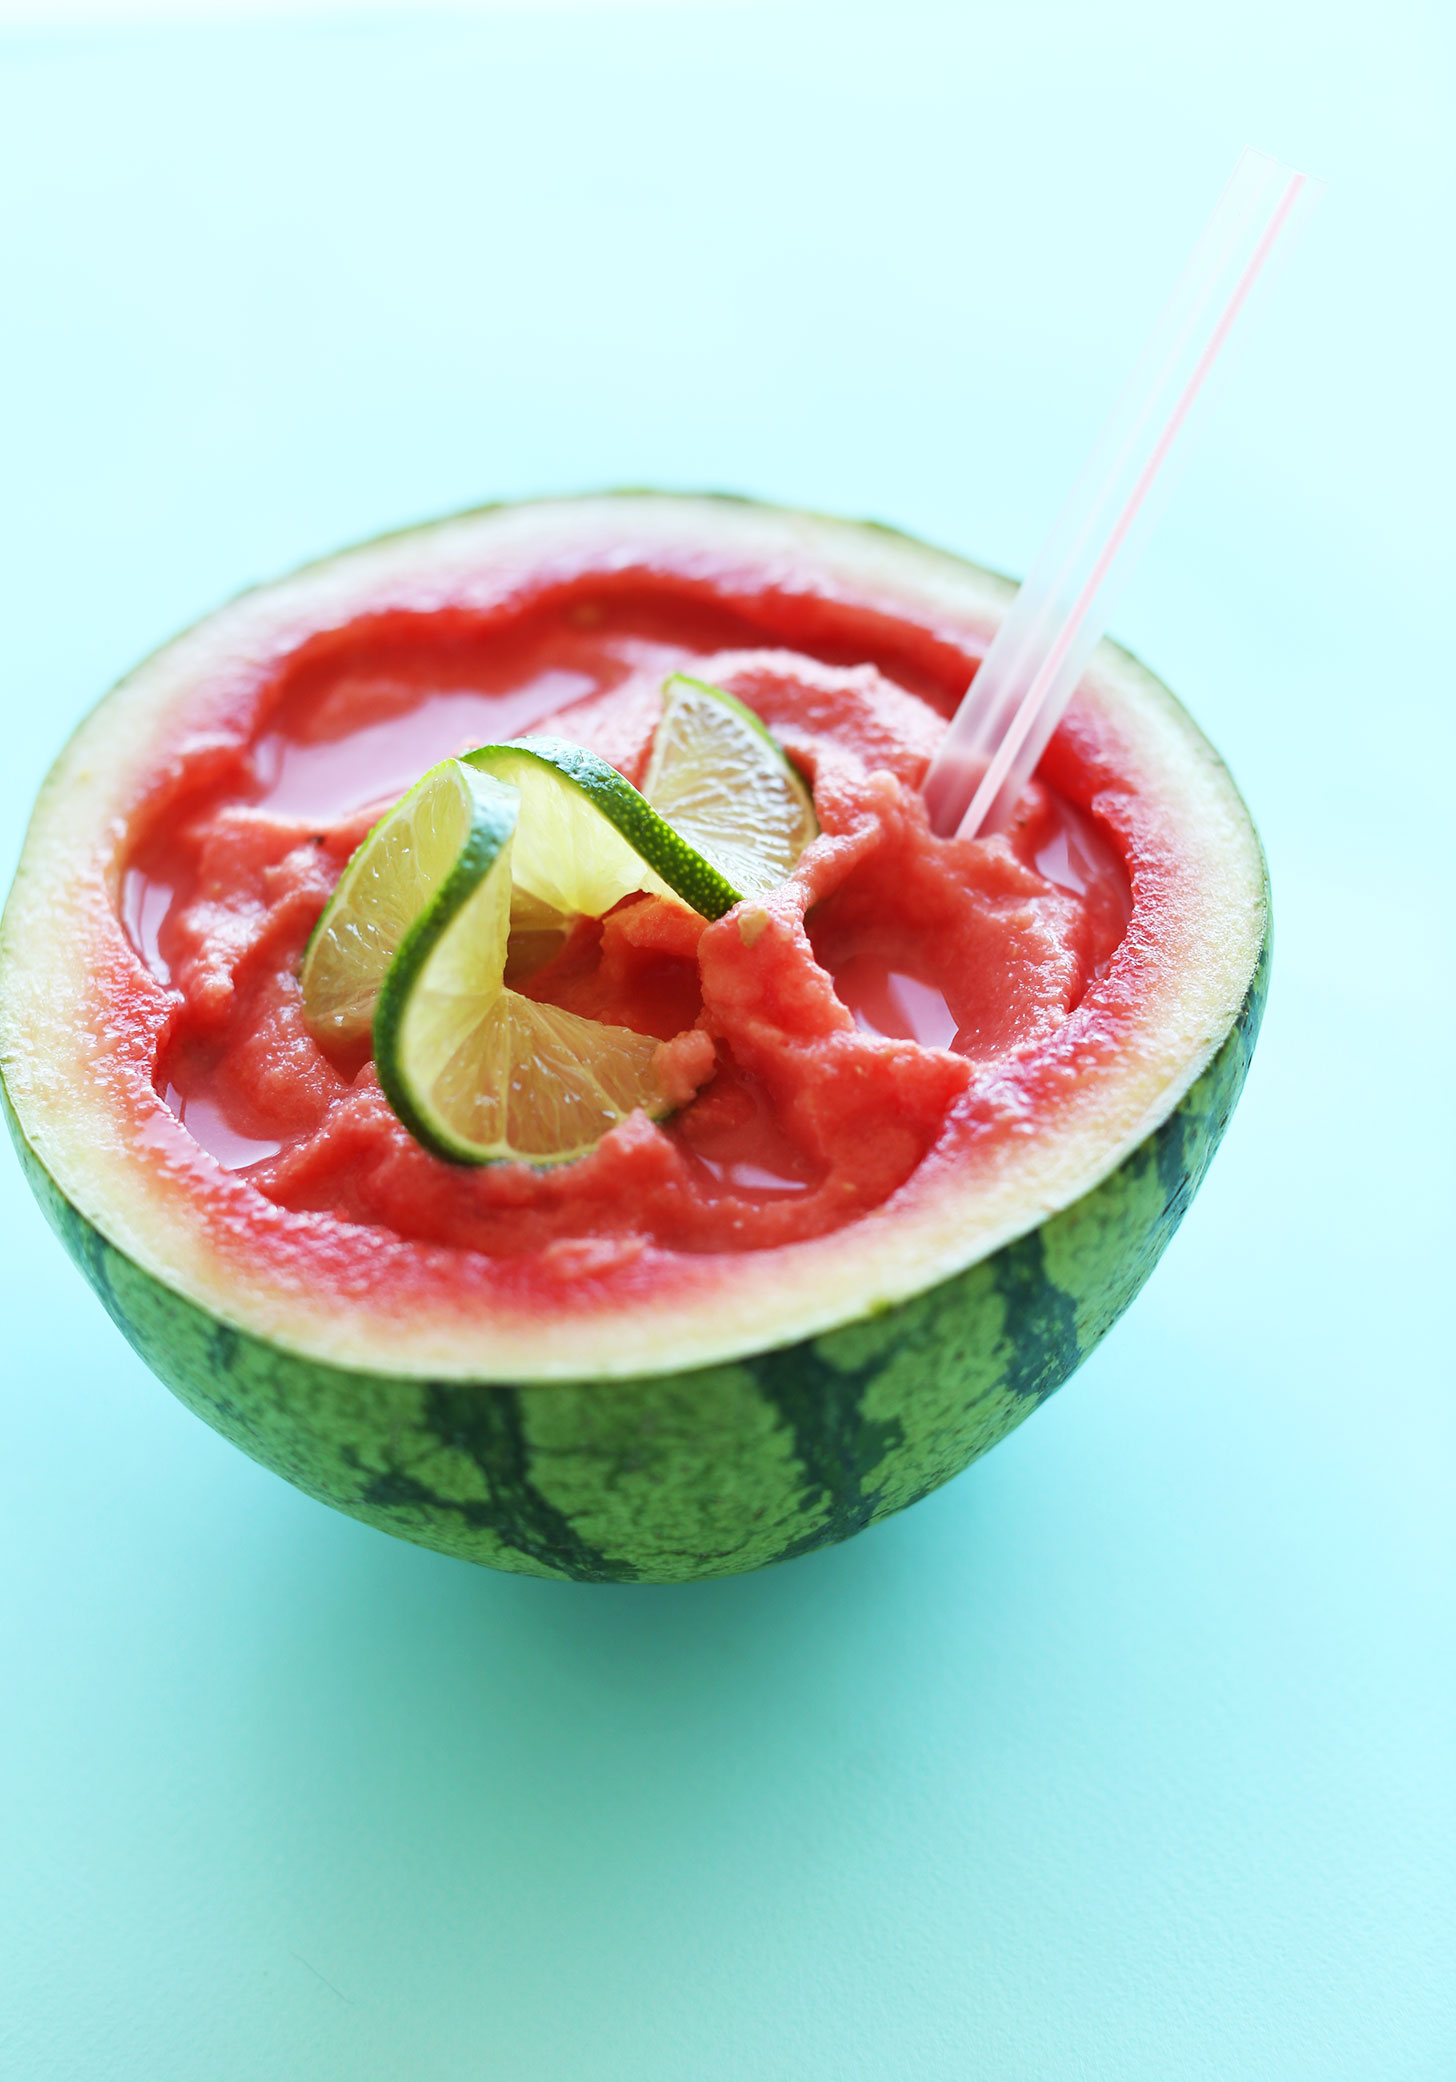 Halved watermelon filled with our refreshing Watermelon Slushie recipe